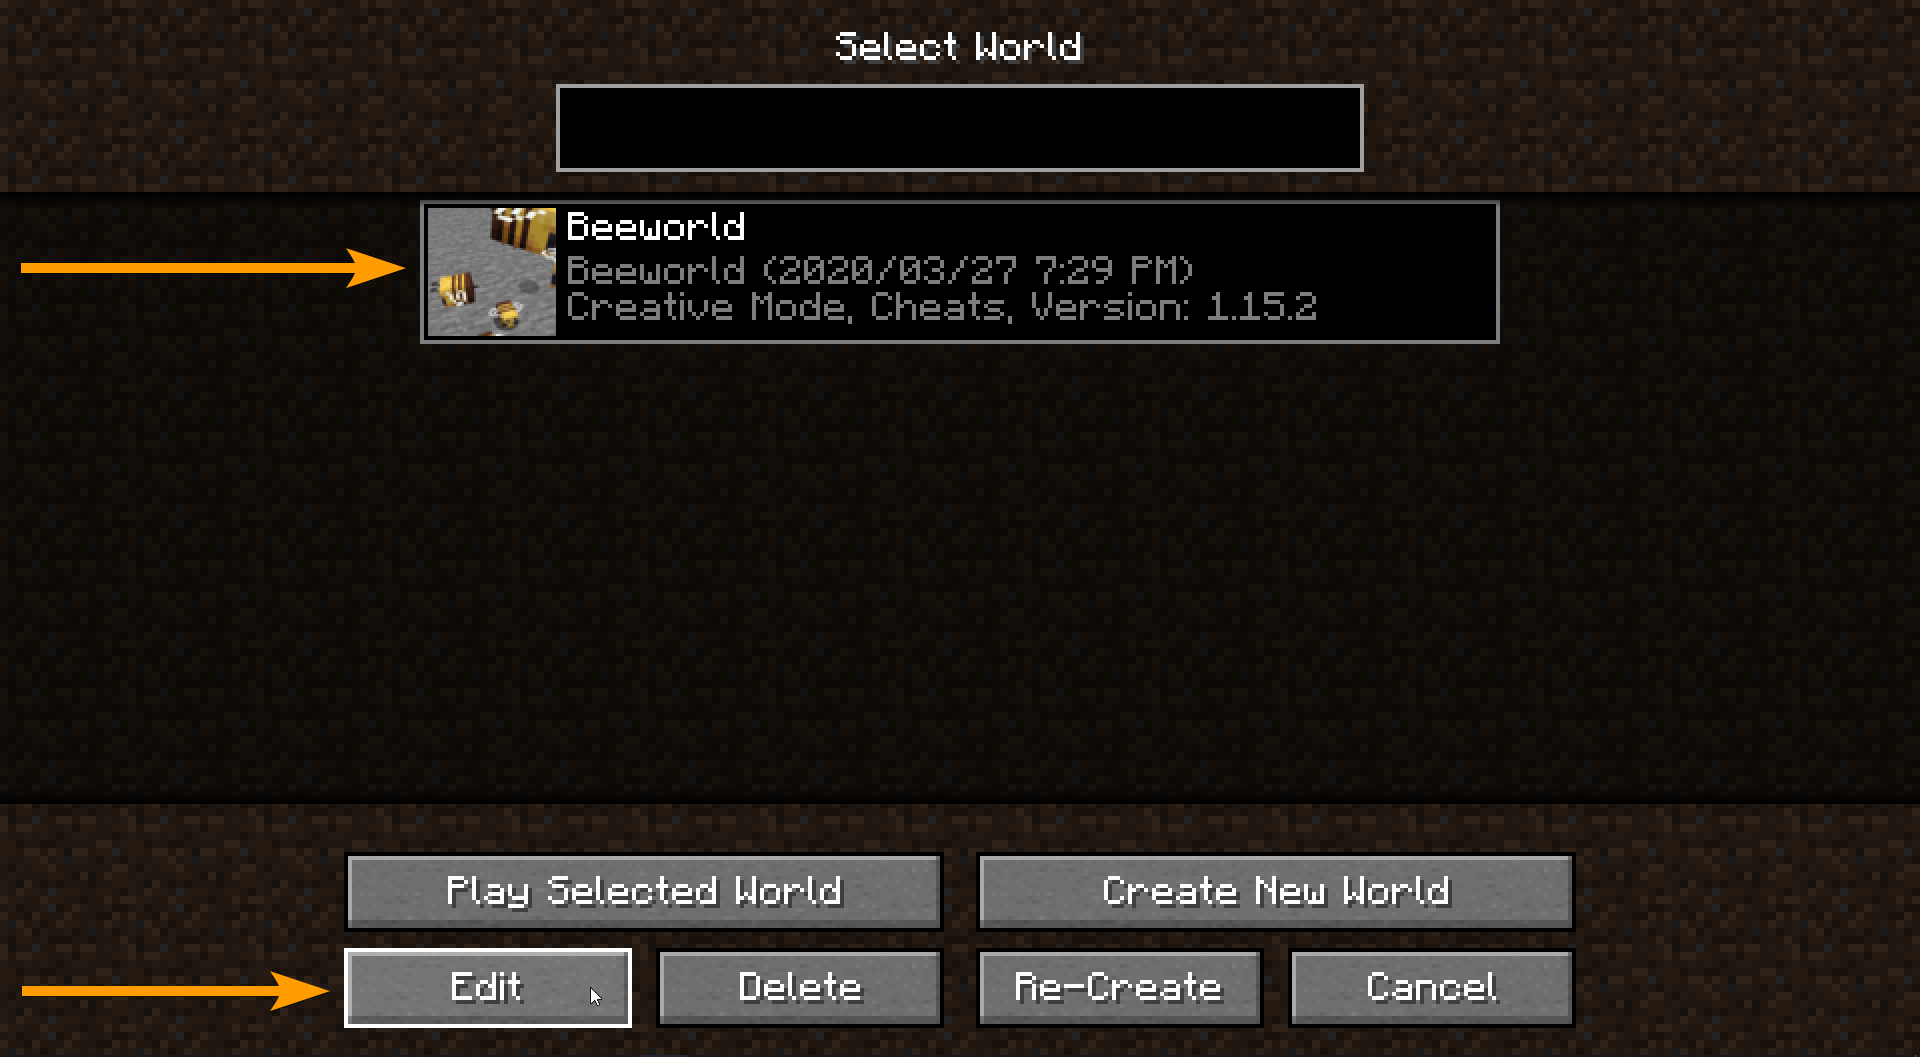 How to Install Minecraft Data Packs